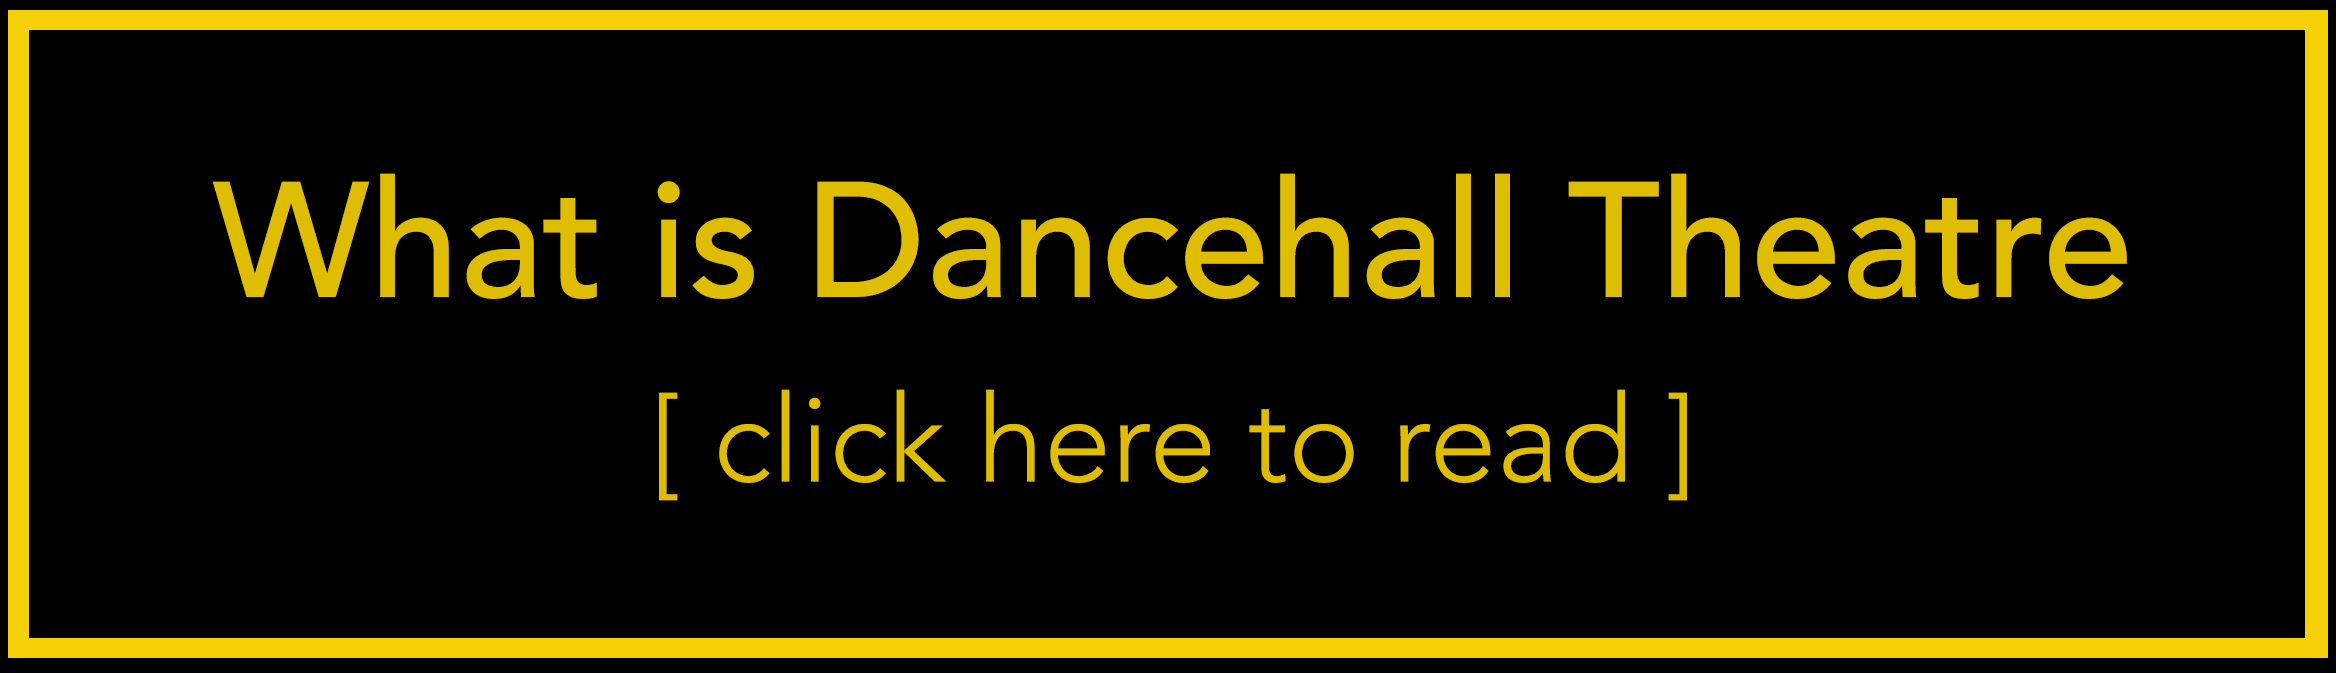 What is Dancehall Theatre